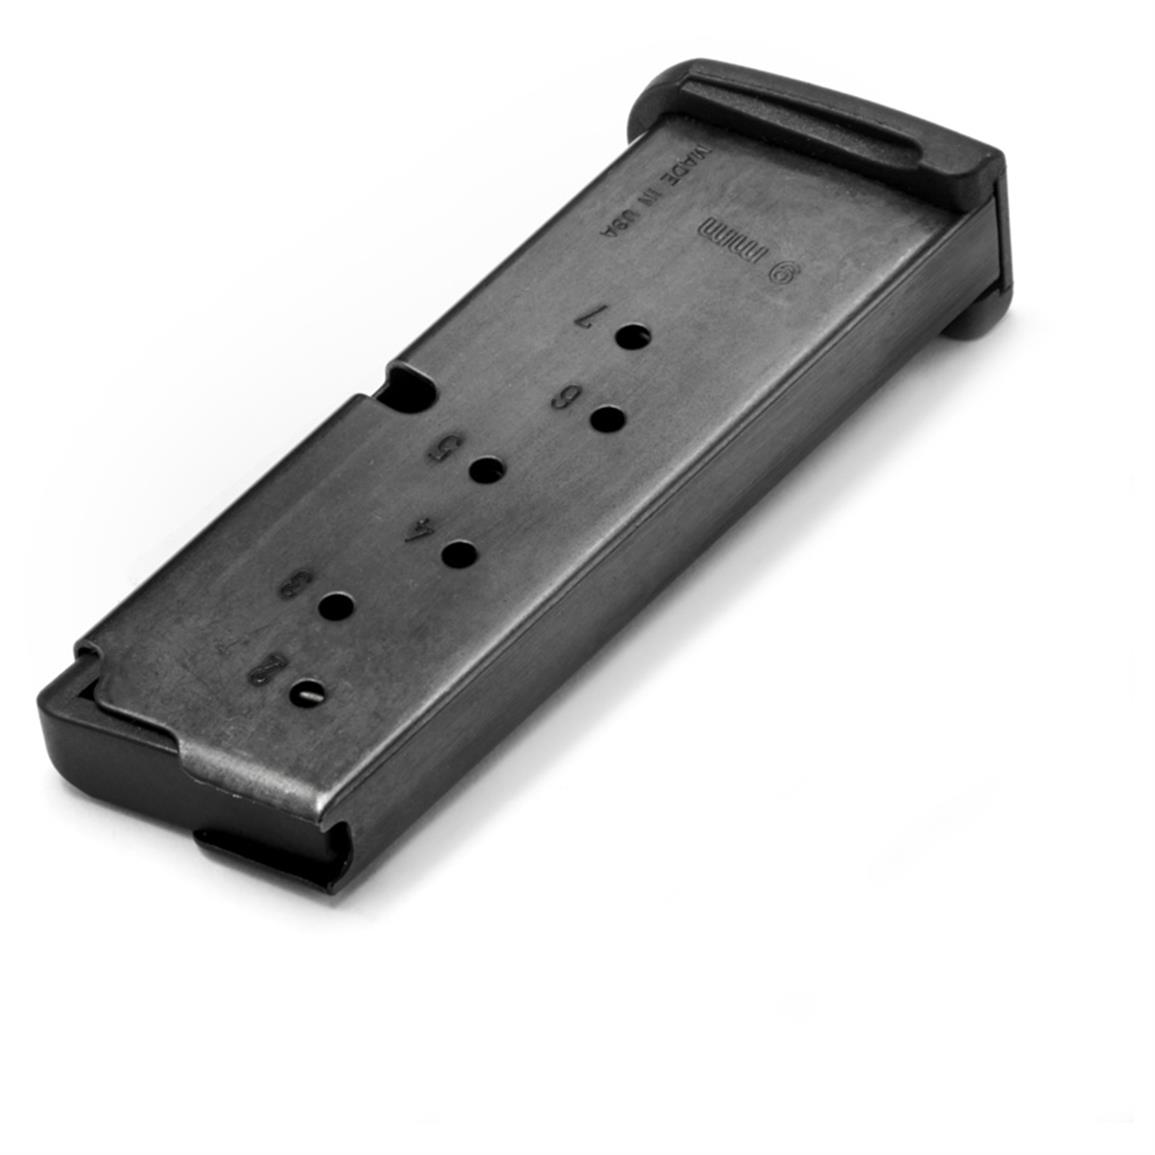 7-rd. Ruger LC9 Factory Handgun Magazine, with Finger Rest - $35.99